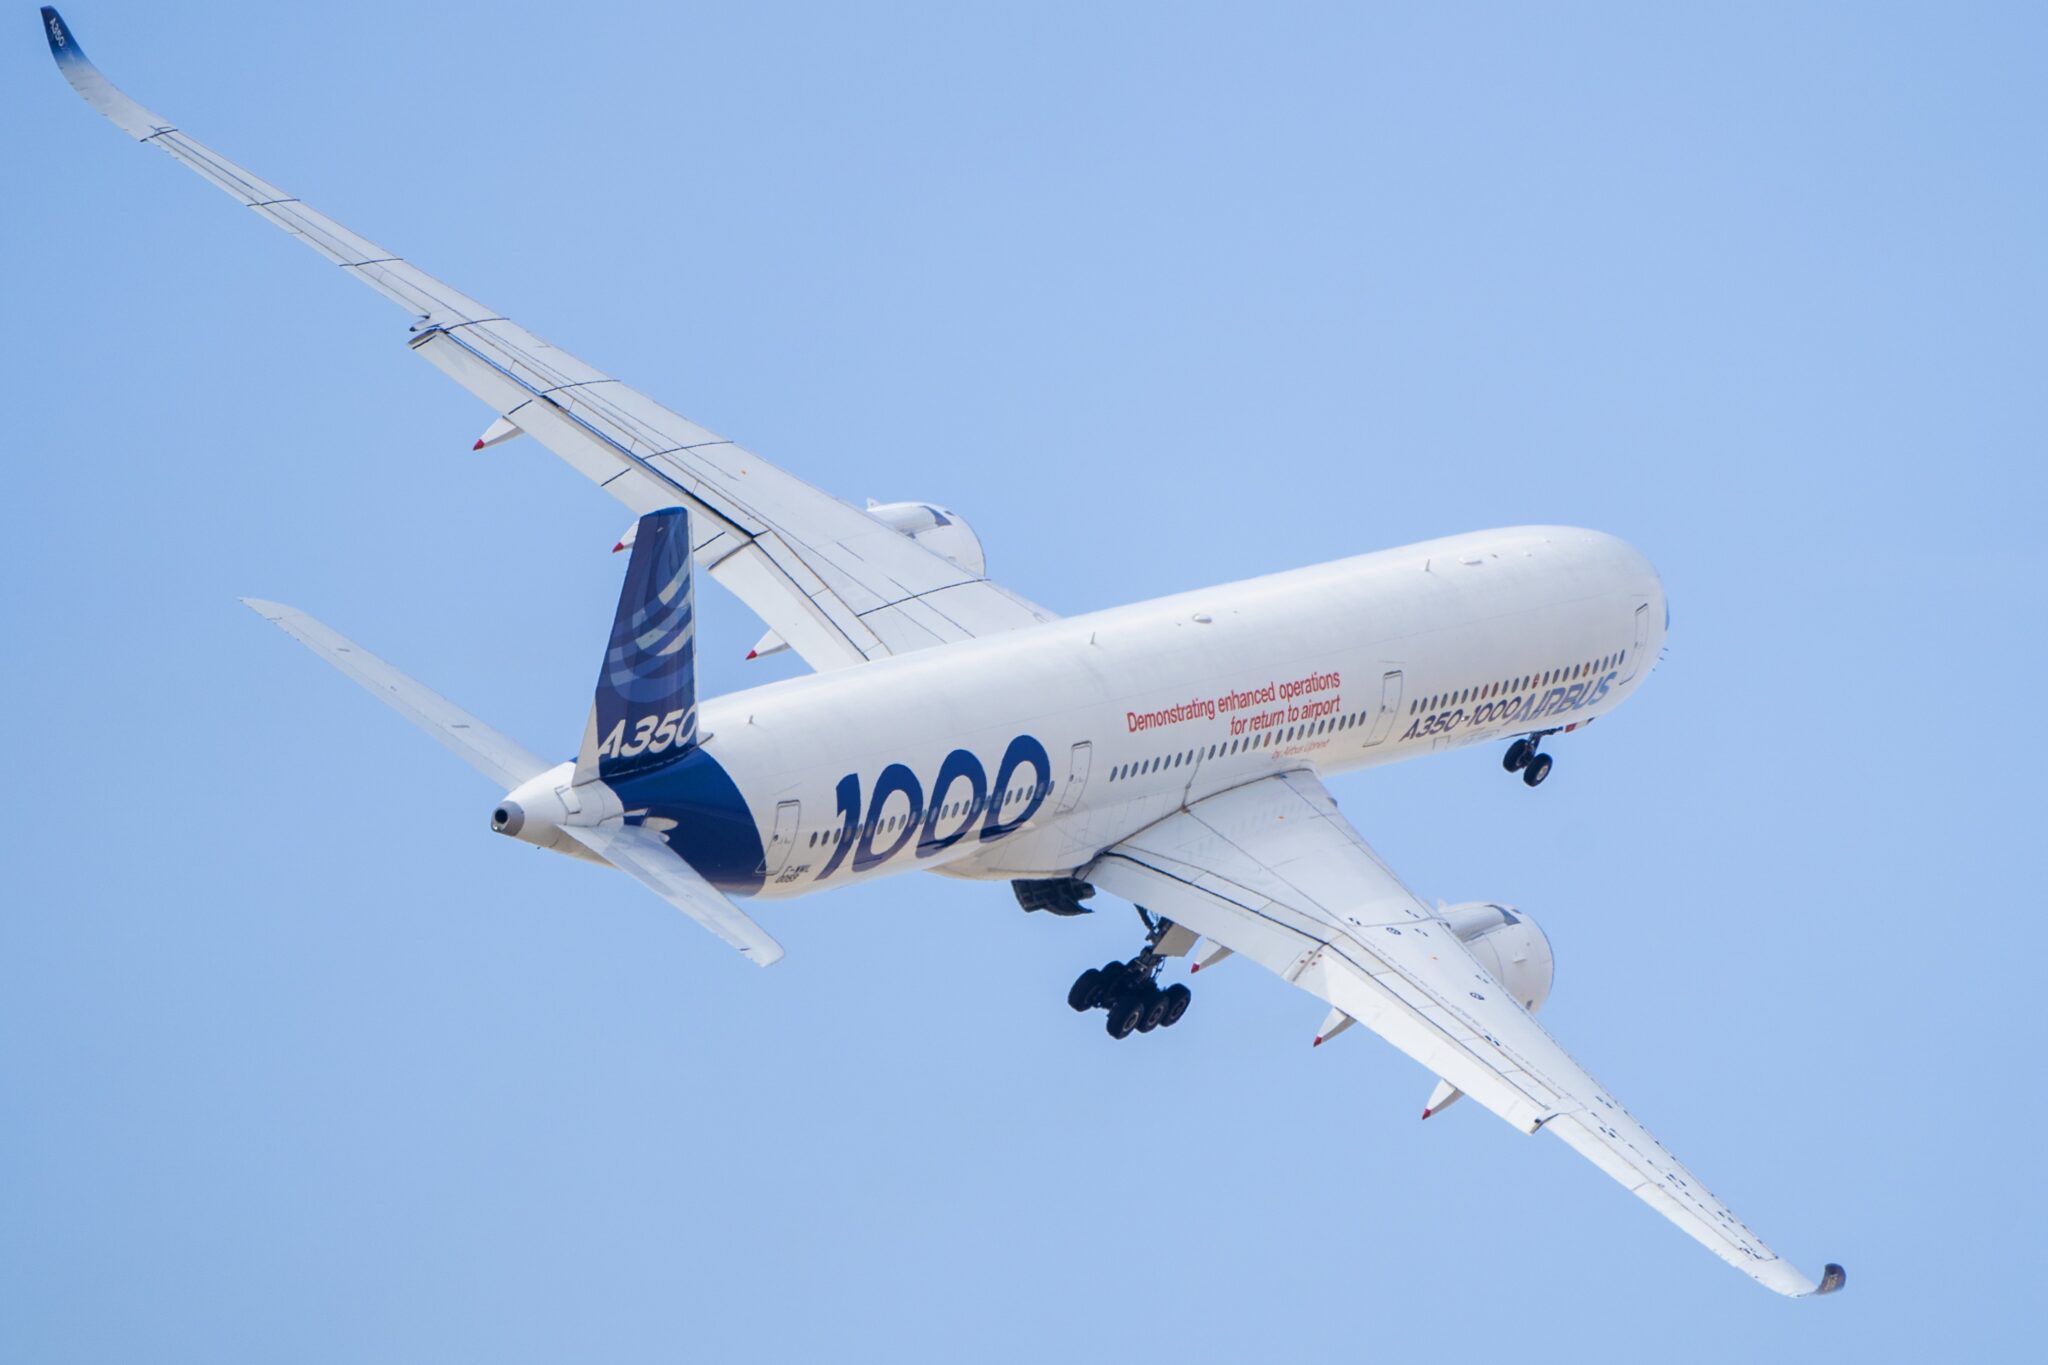 An Airbus A350-1000 demonstrator on display at the 2023 Dubai Airshow / Credit: Airbus